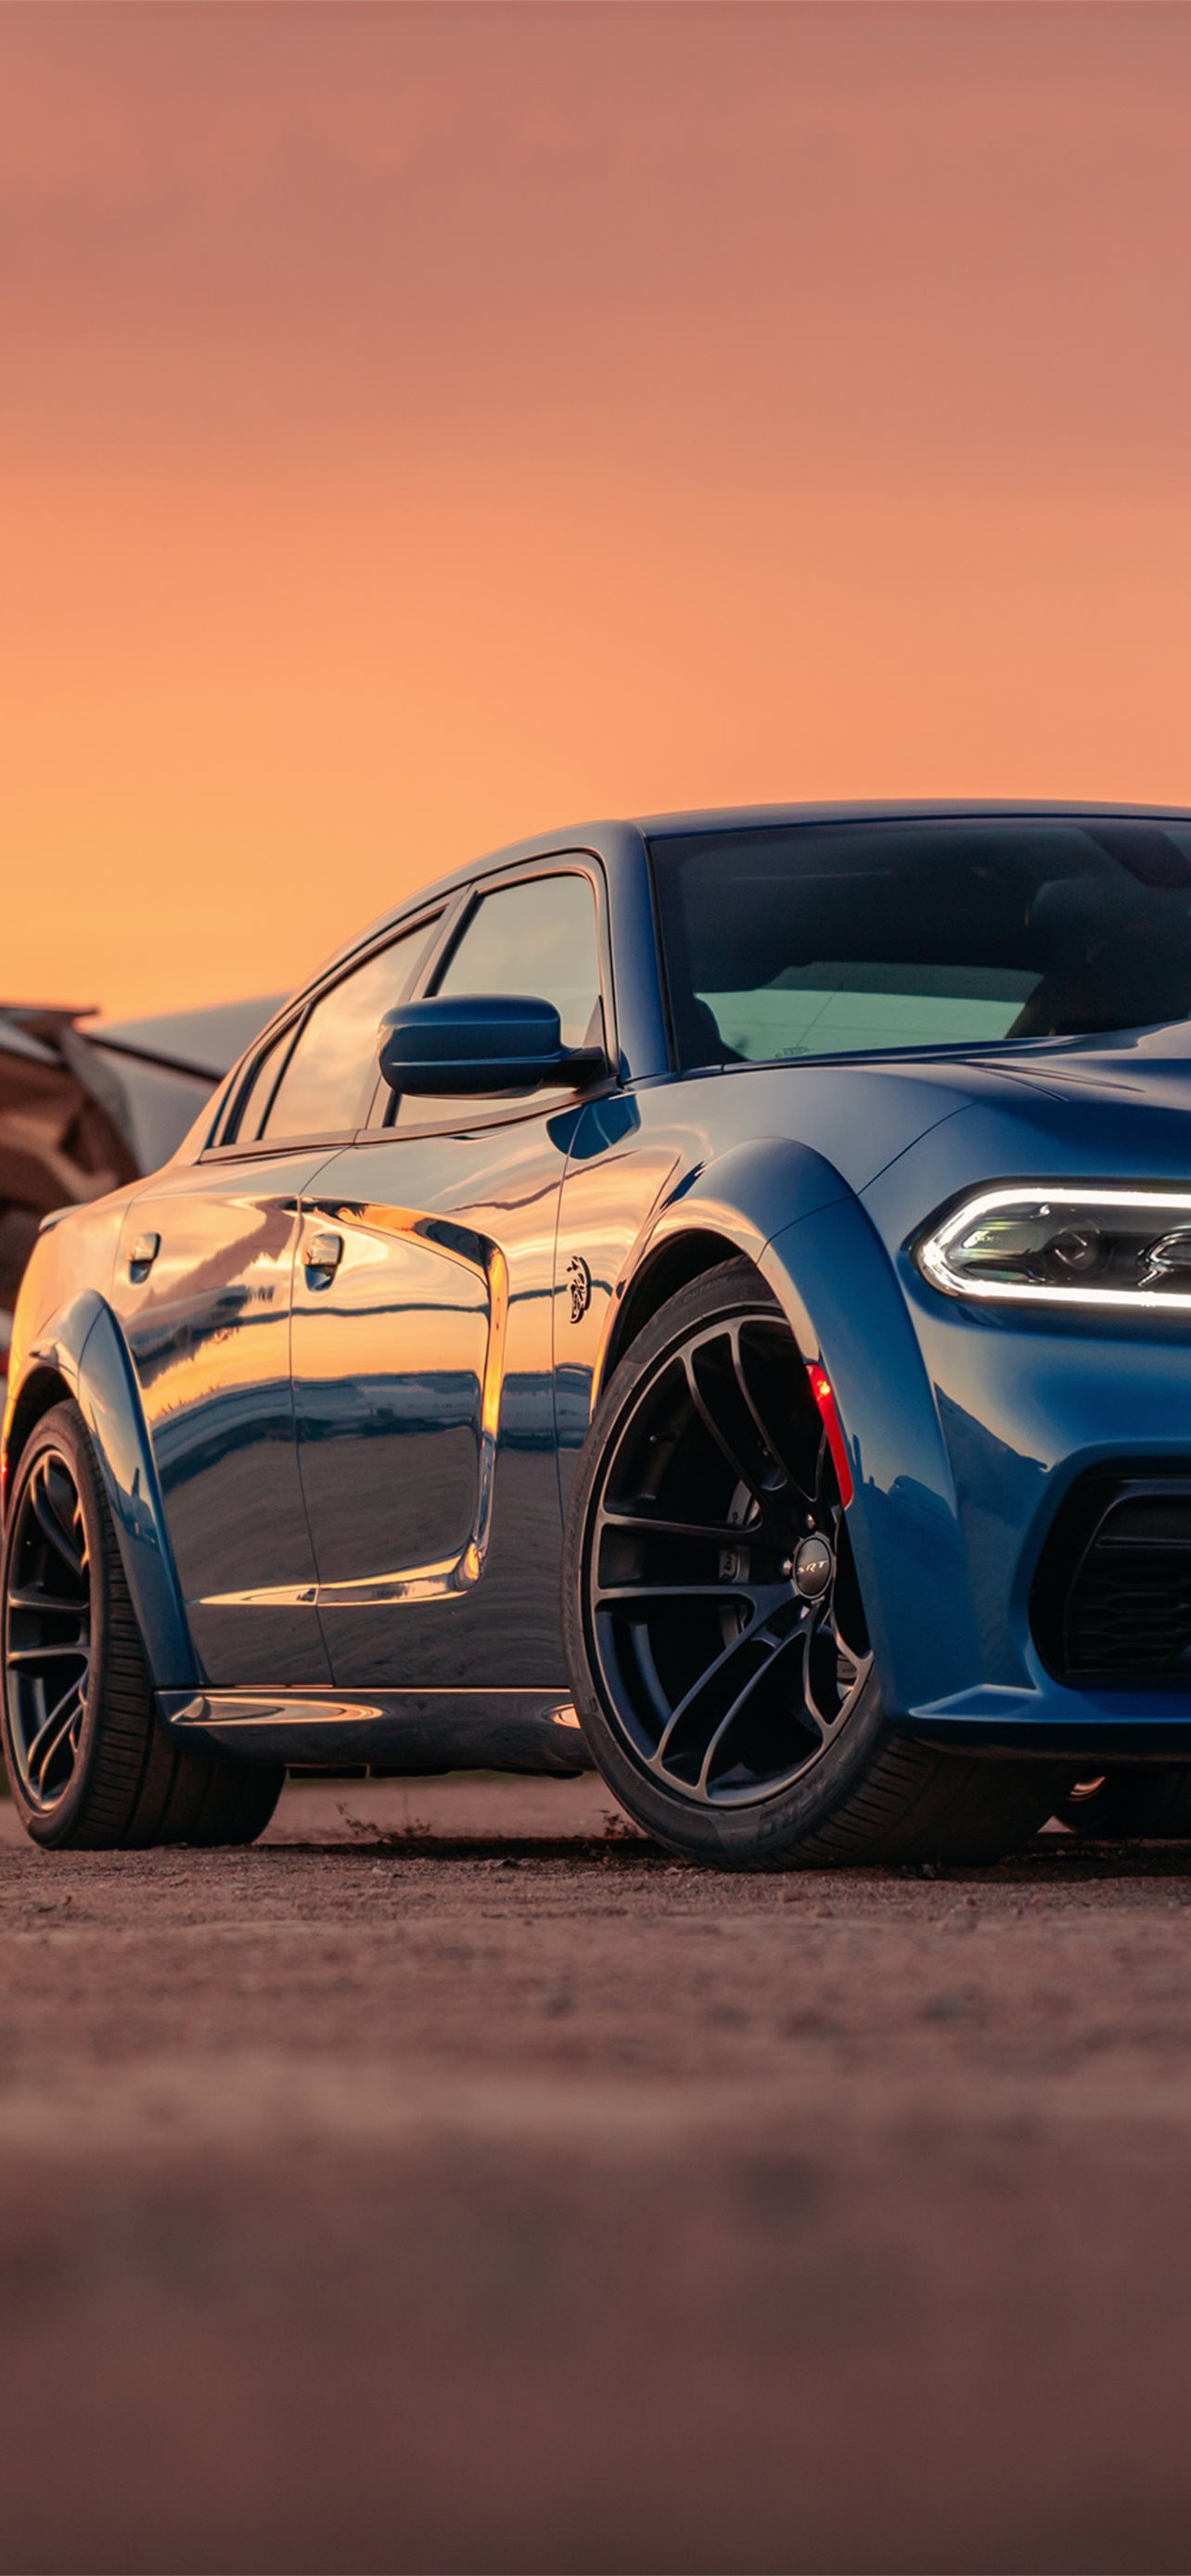  Dodge charger rt wallpaper   Wallery